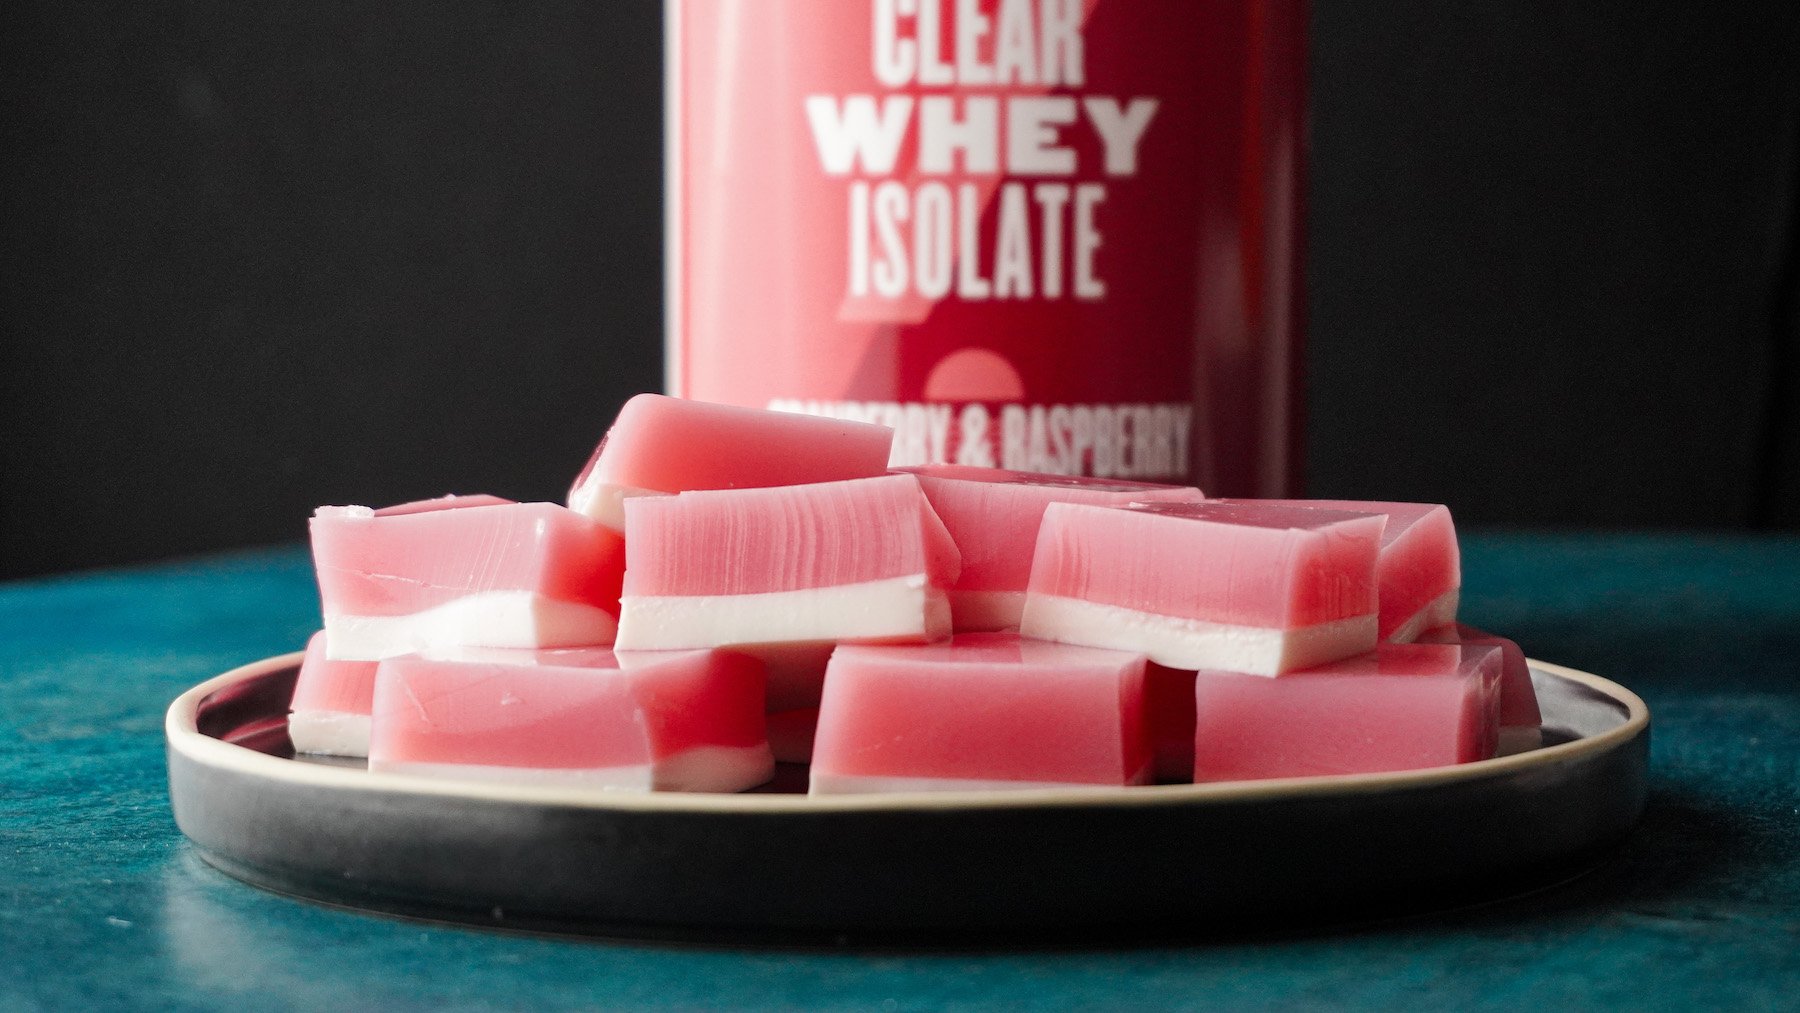 Clear Whey Jelly Sweets